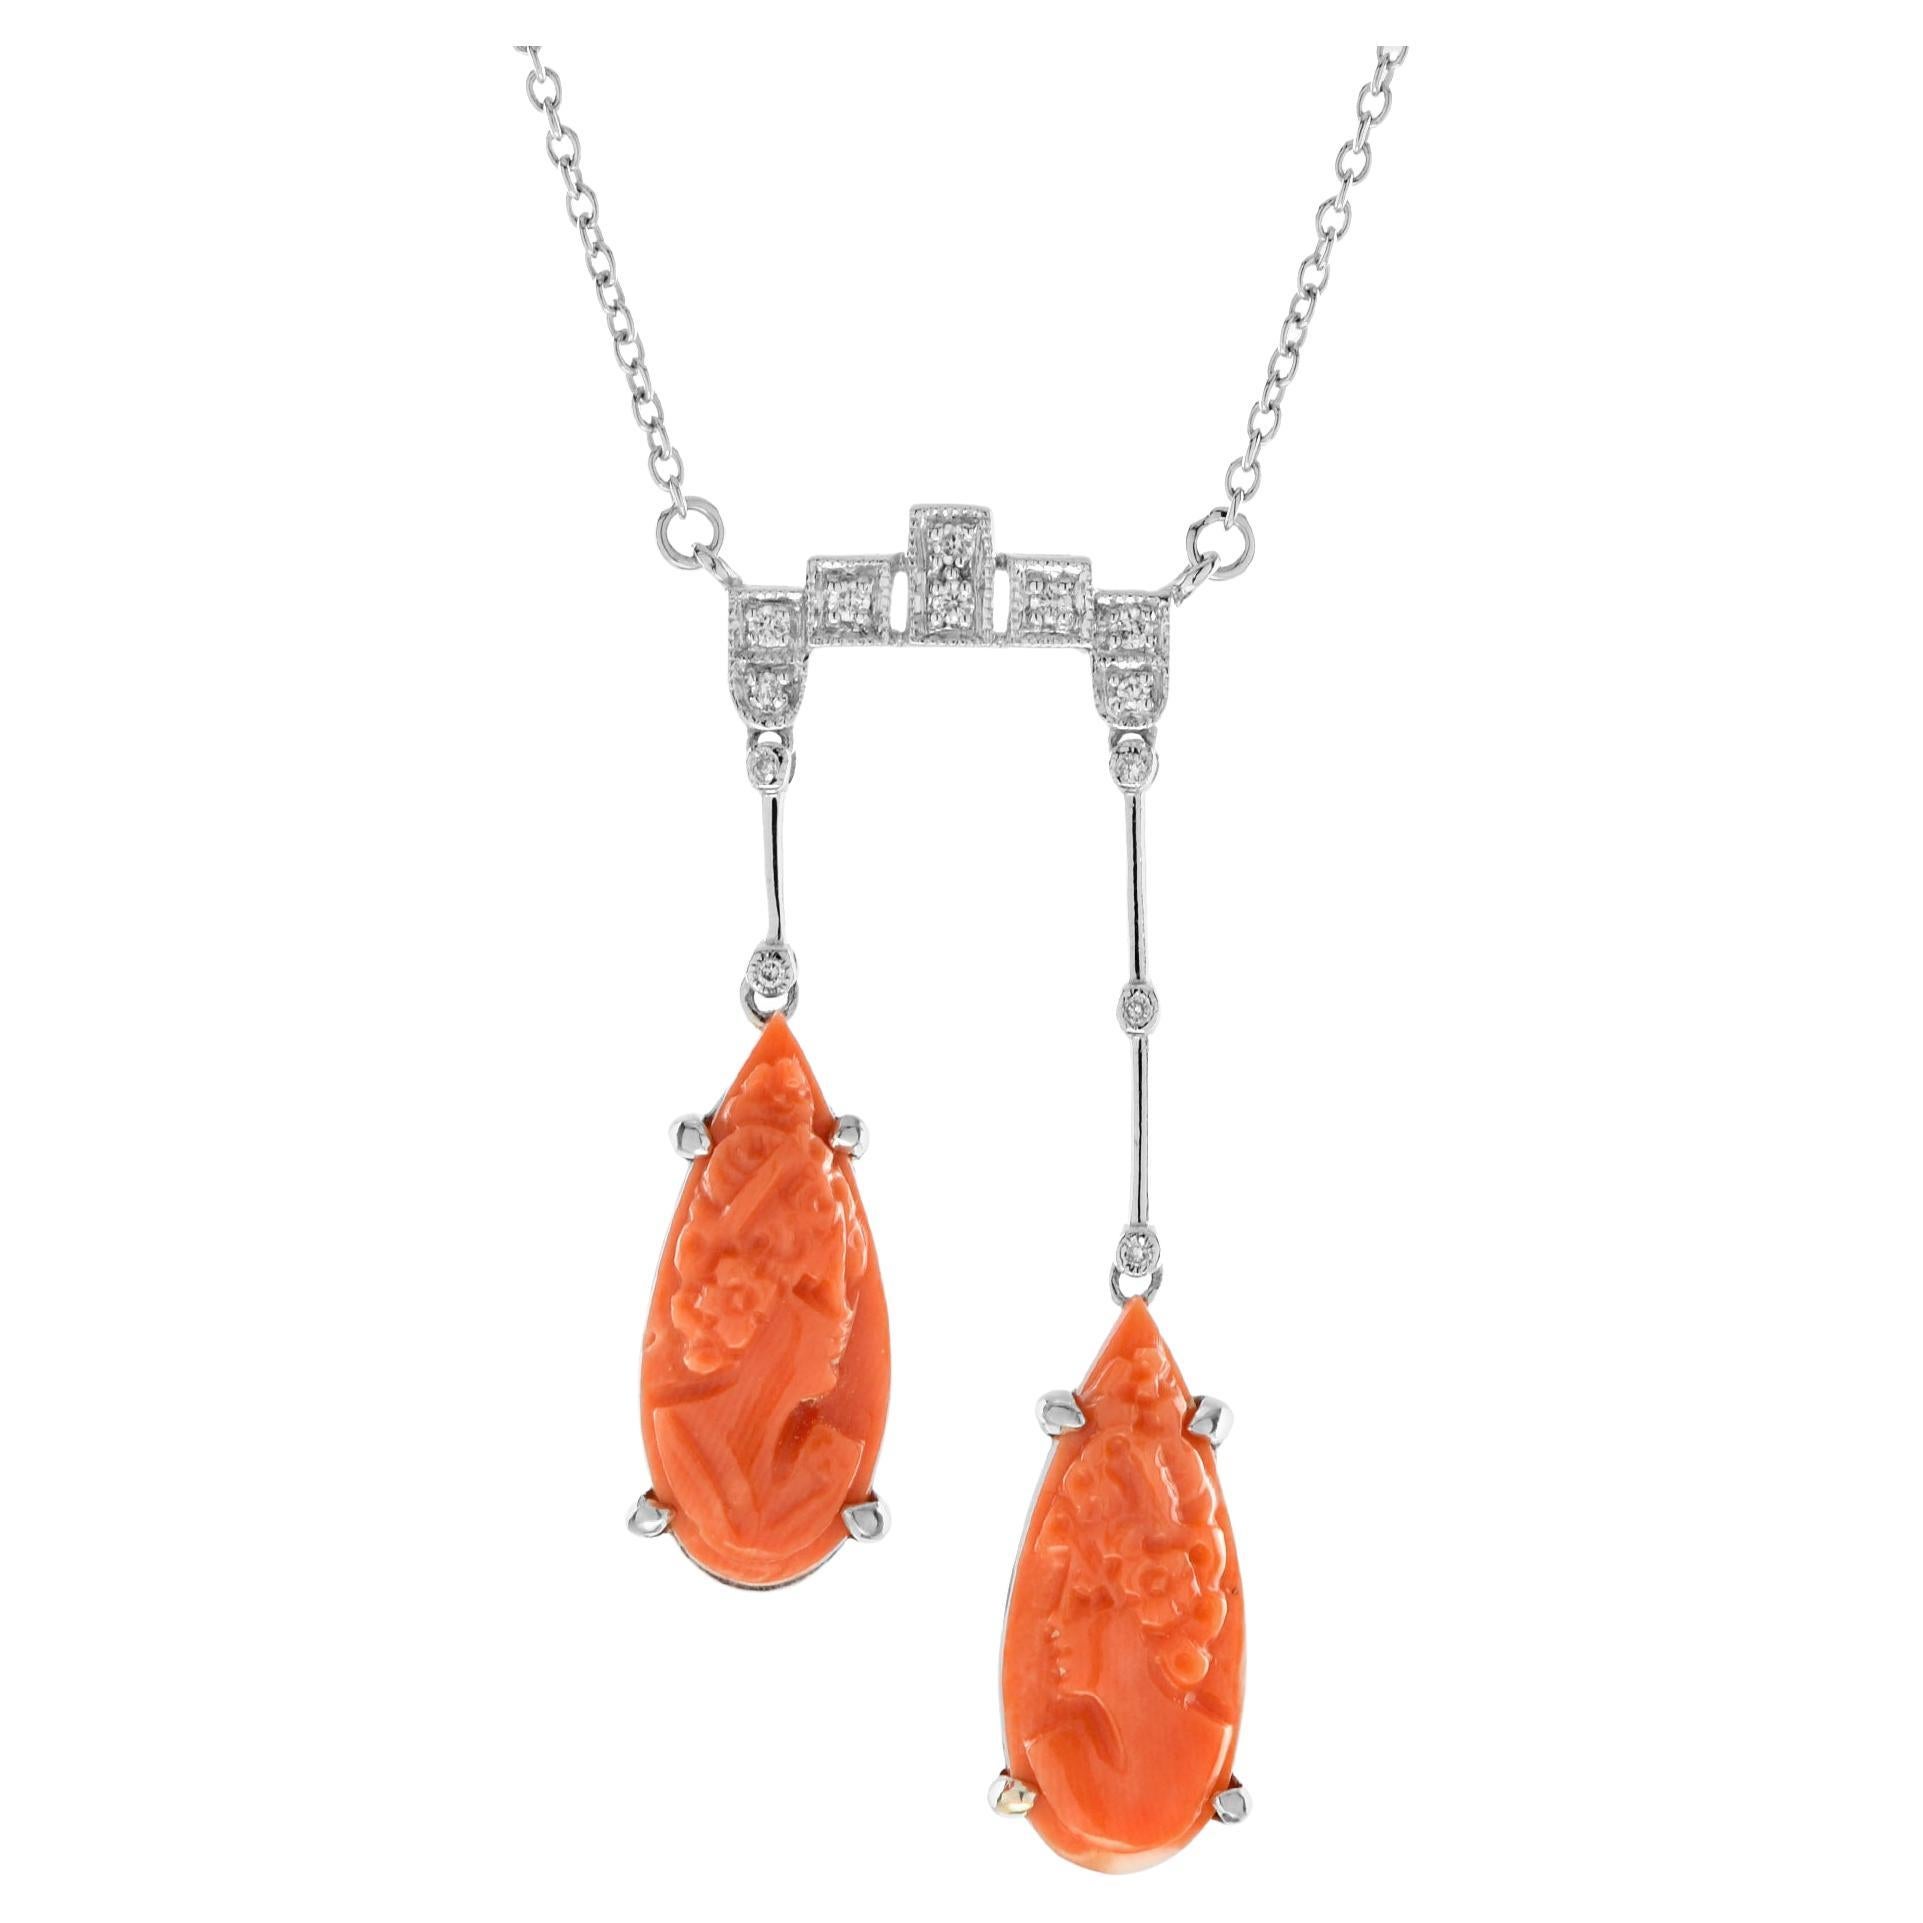 Cameo Coral and Diamond Edwardian Style Negligee Necklace in 14K White Gold